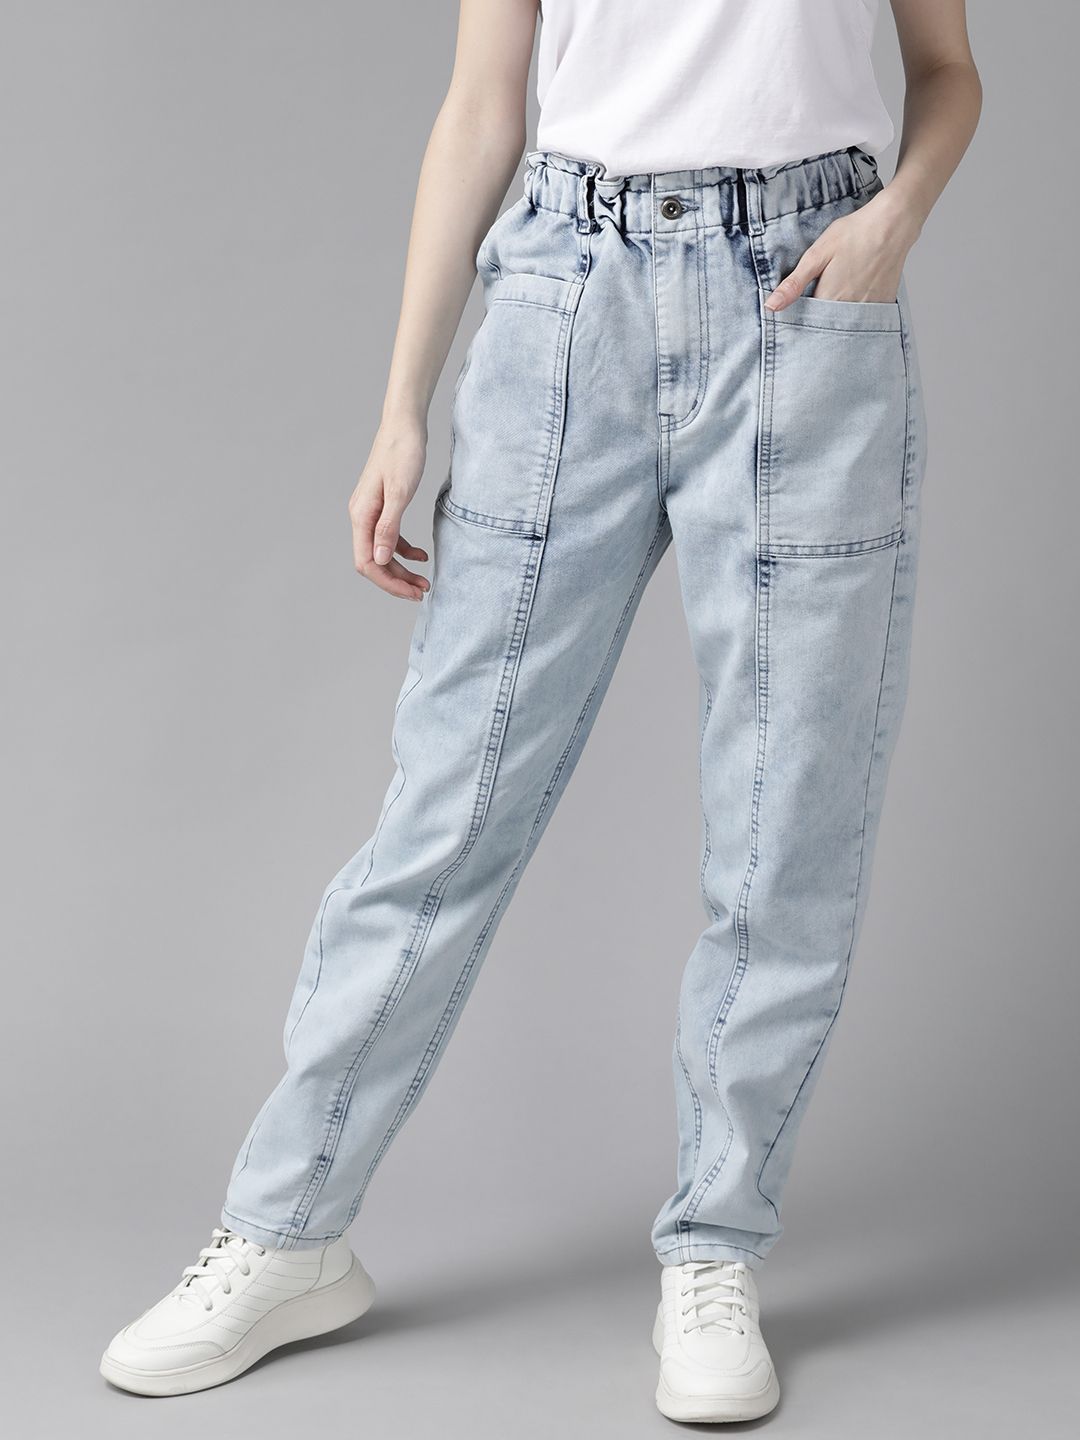 Roadster Women Blue Jean High-Rise Light Fade Slouchy Fit Pure Cotton Jeans Price in India